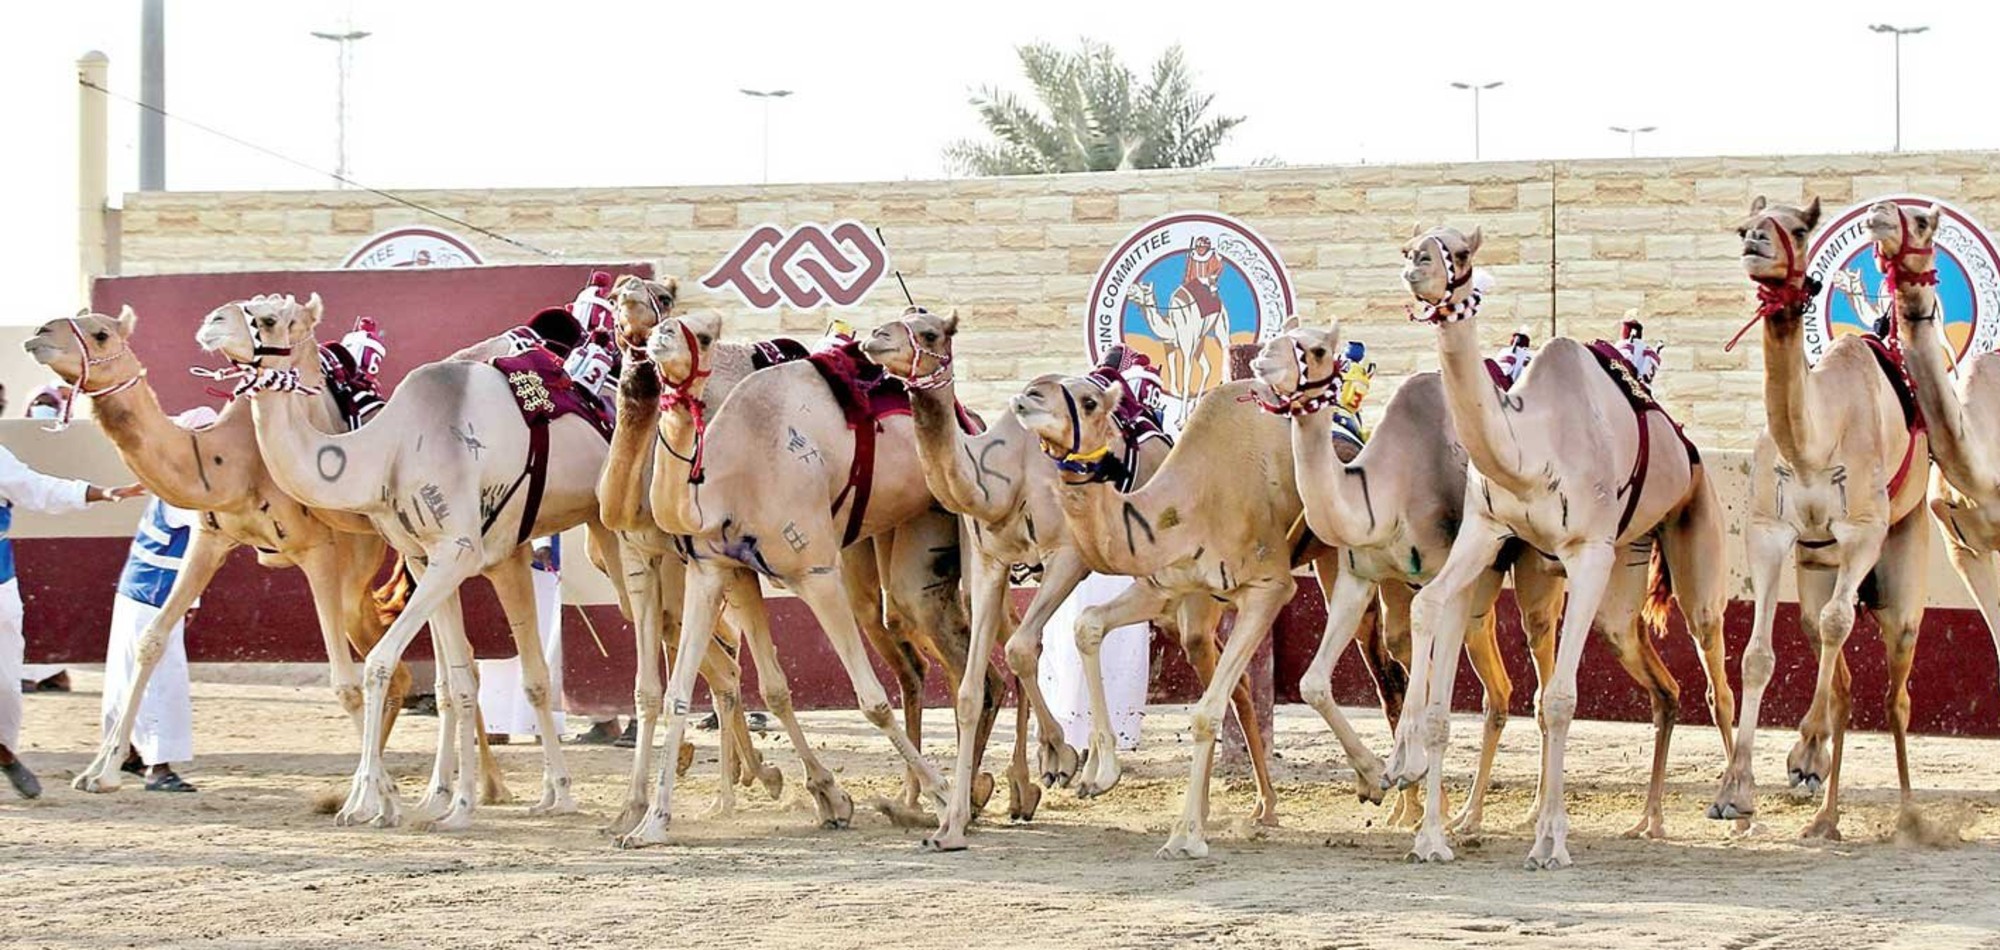 The Camel Racing Committee Expects a Record Participation in HH the Amir festival